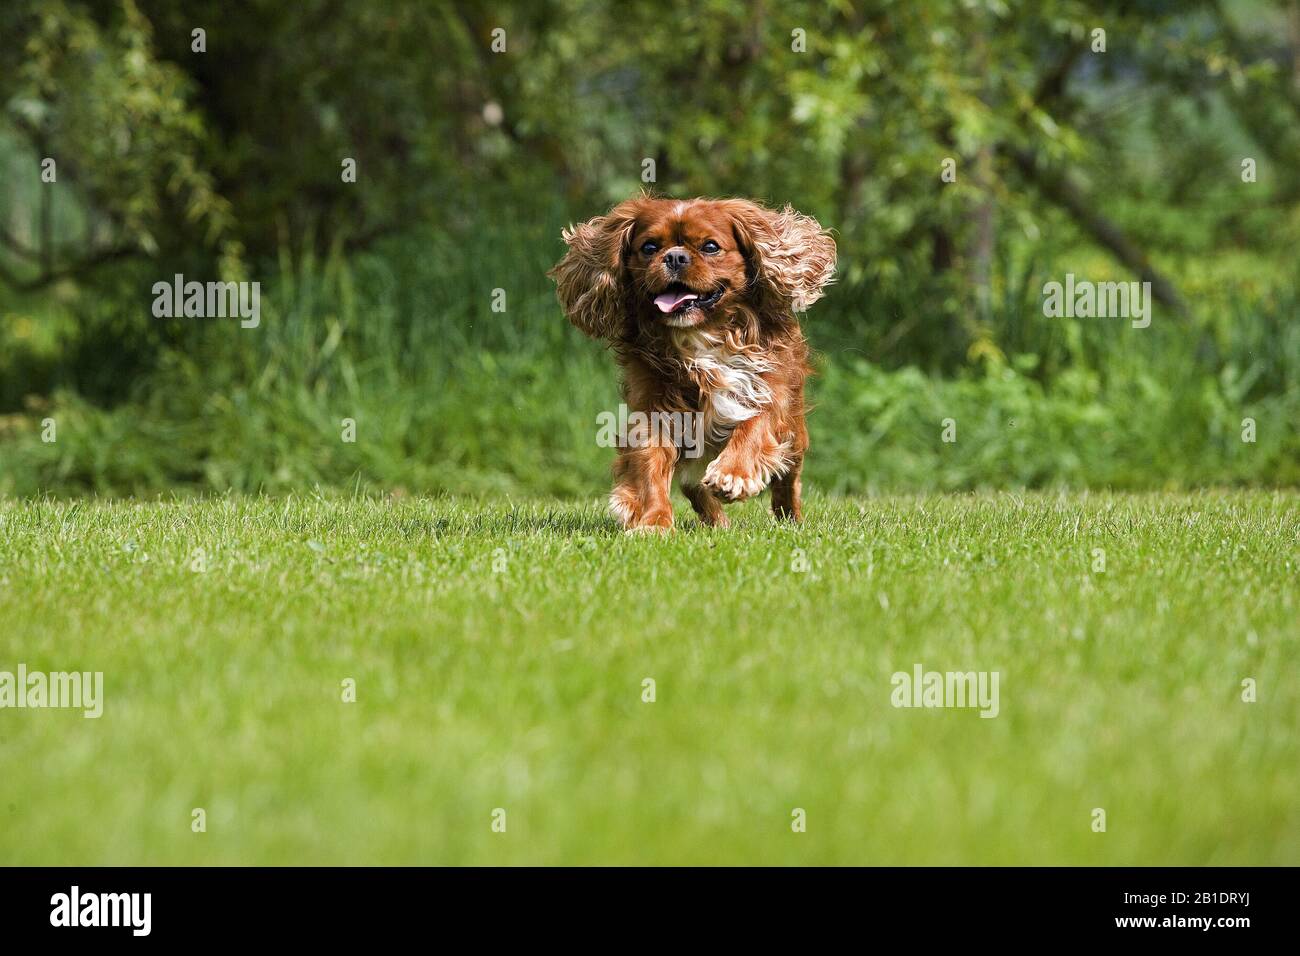 Cavalier King Charles Spaniel, Male running on Lawn Stock Photo